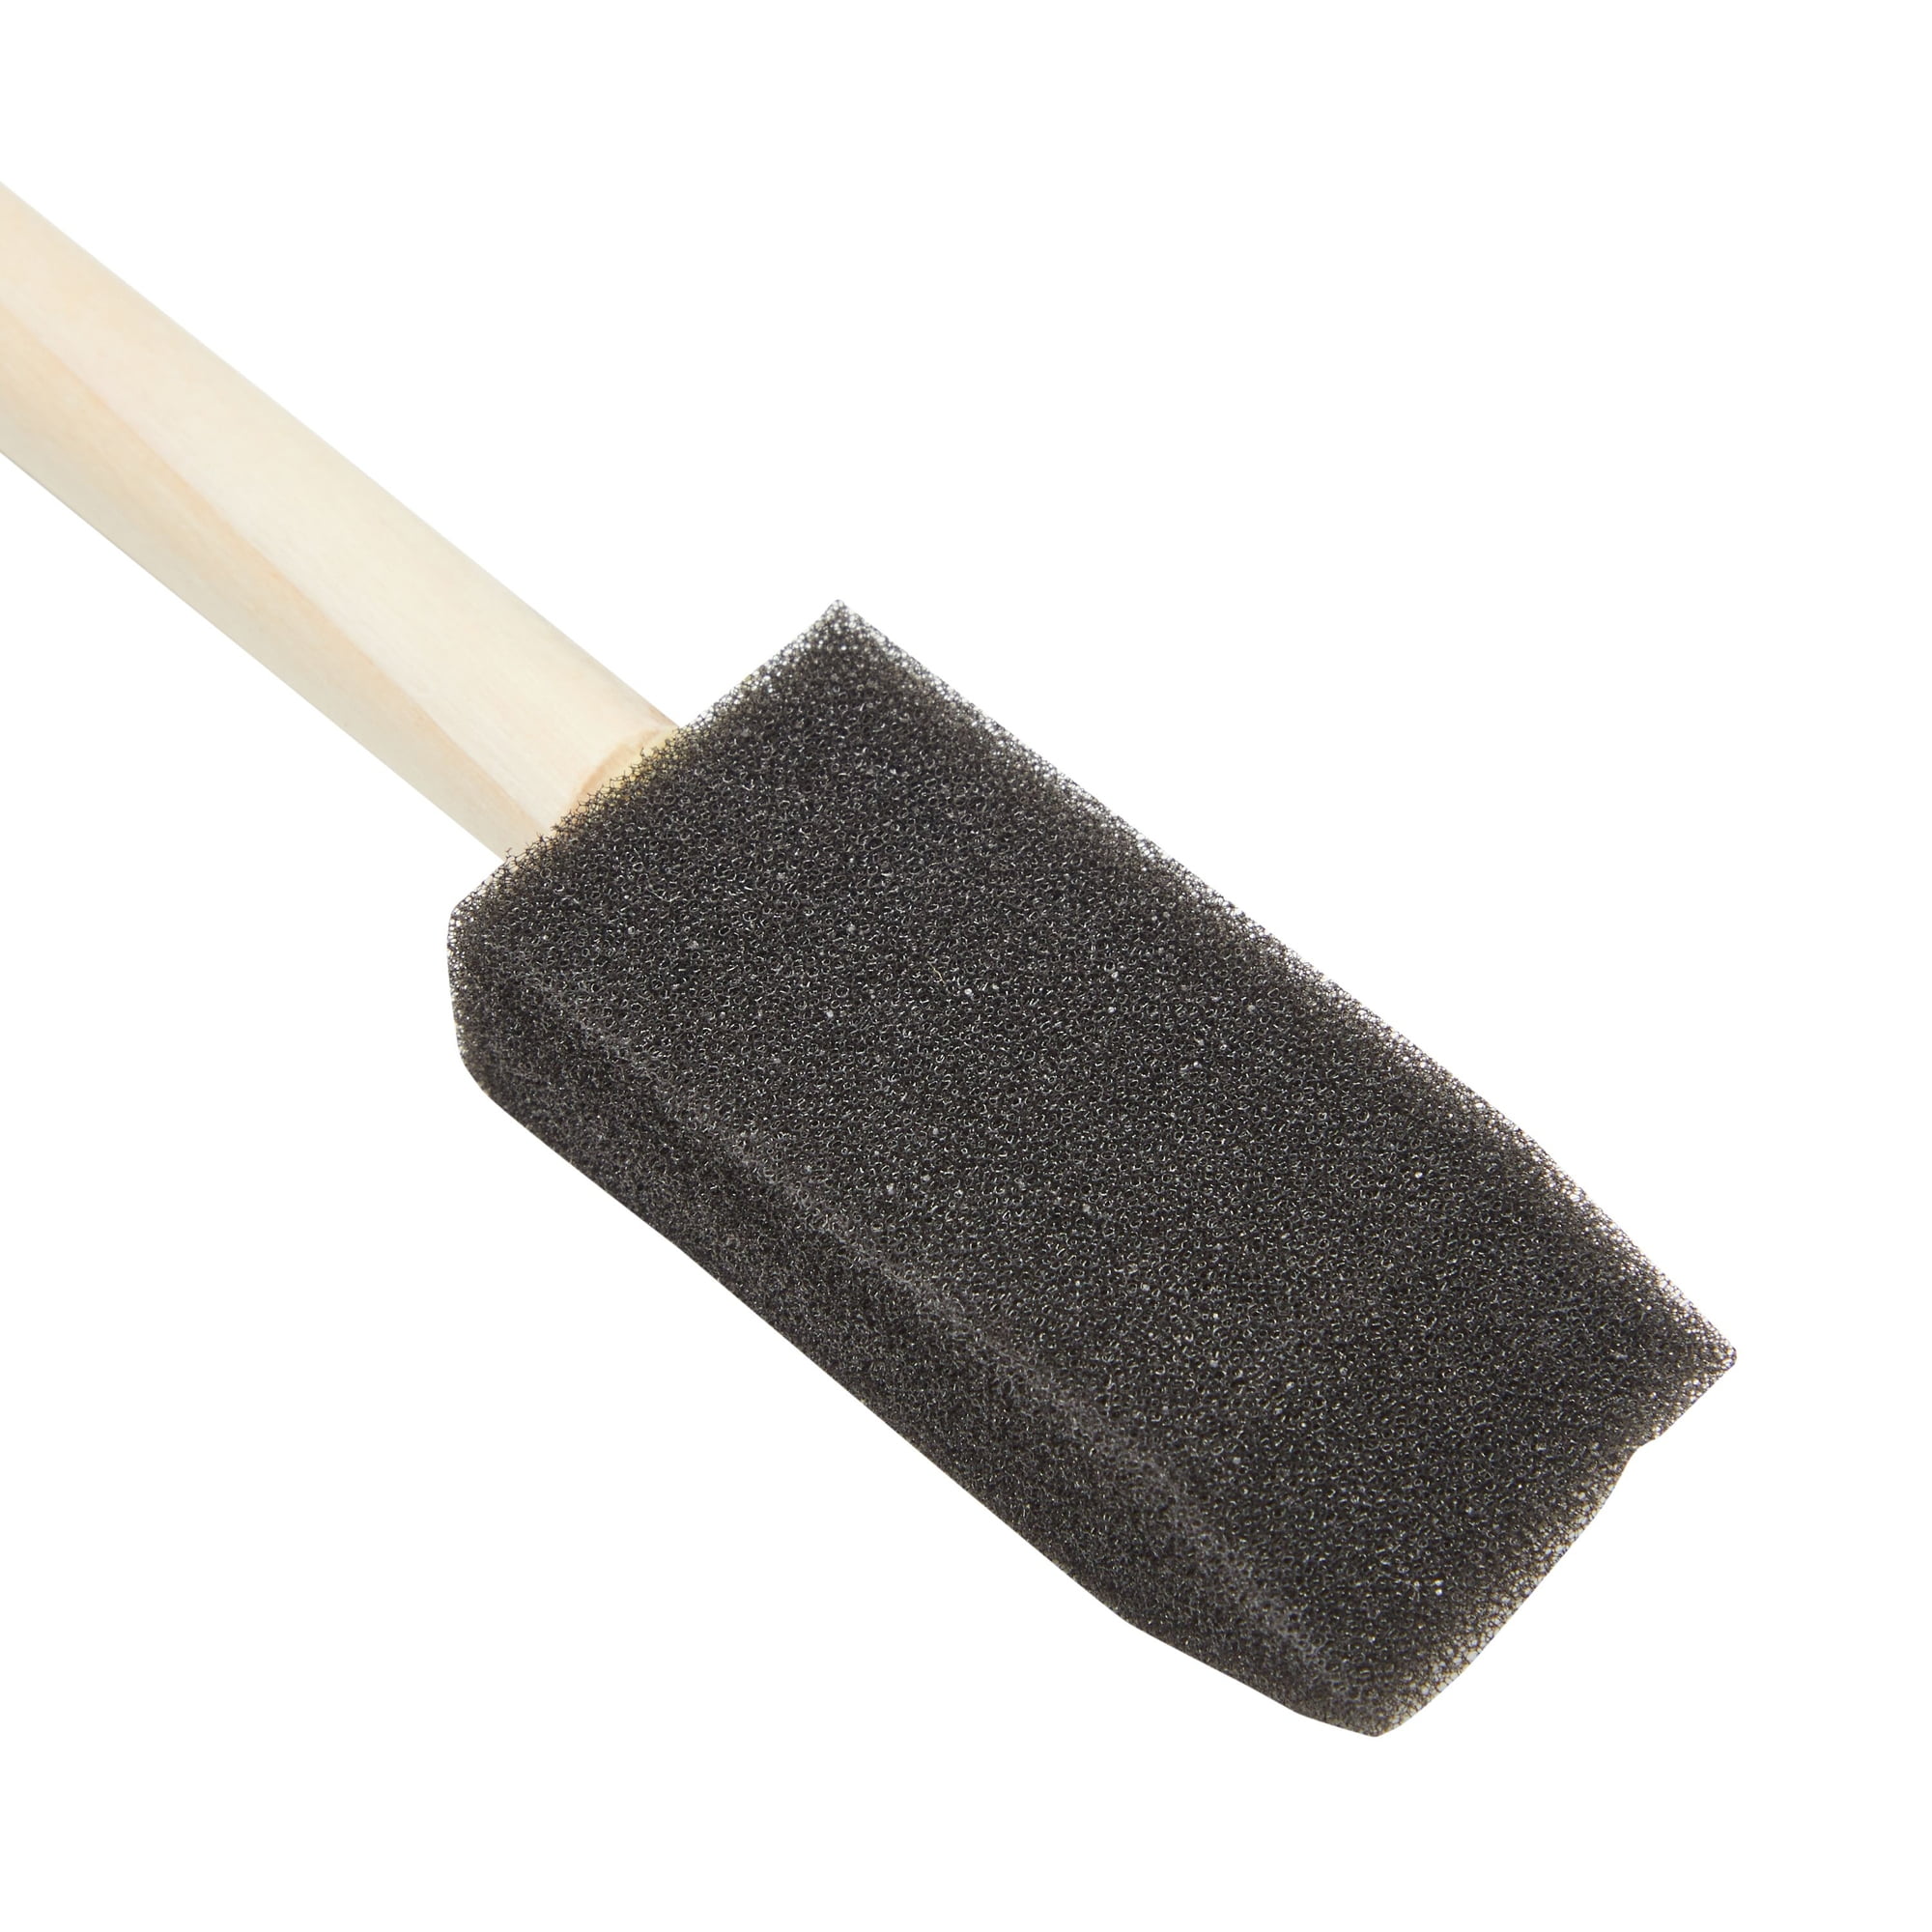 1 inch Foam Brushes for Painting, Crafts, Mod Podge, Wood Stain (120 Pack)